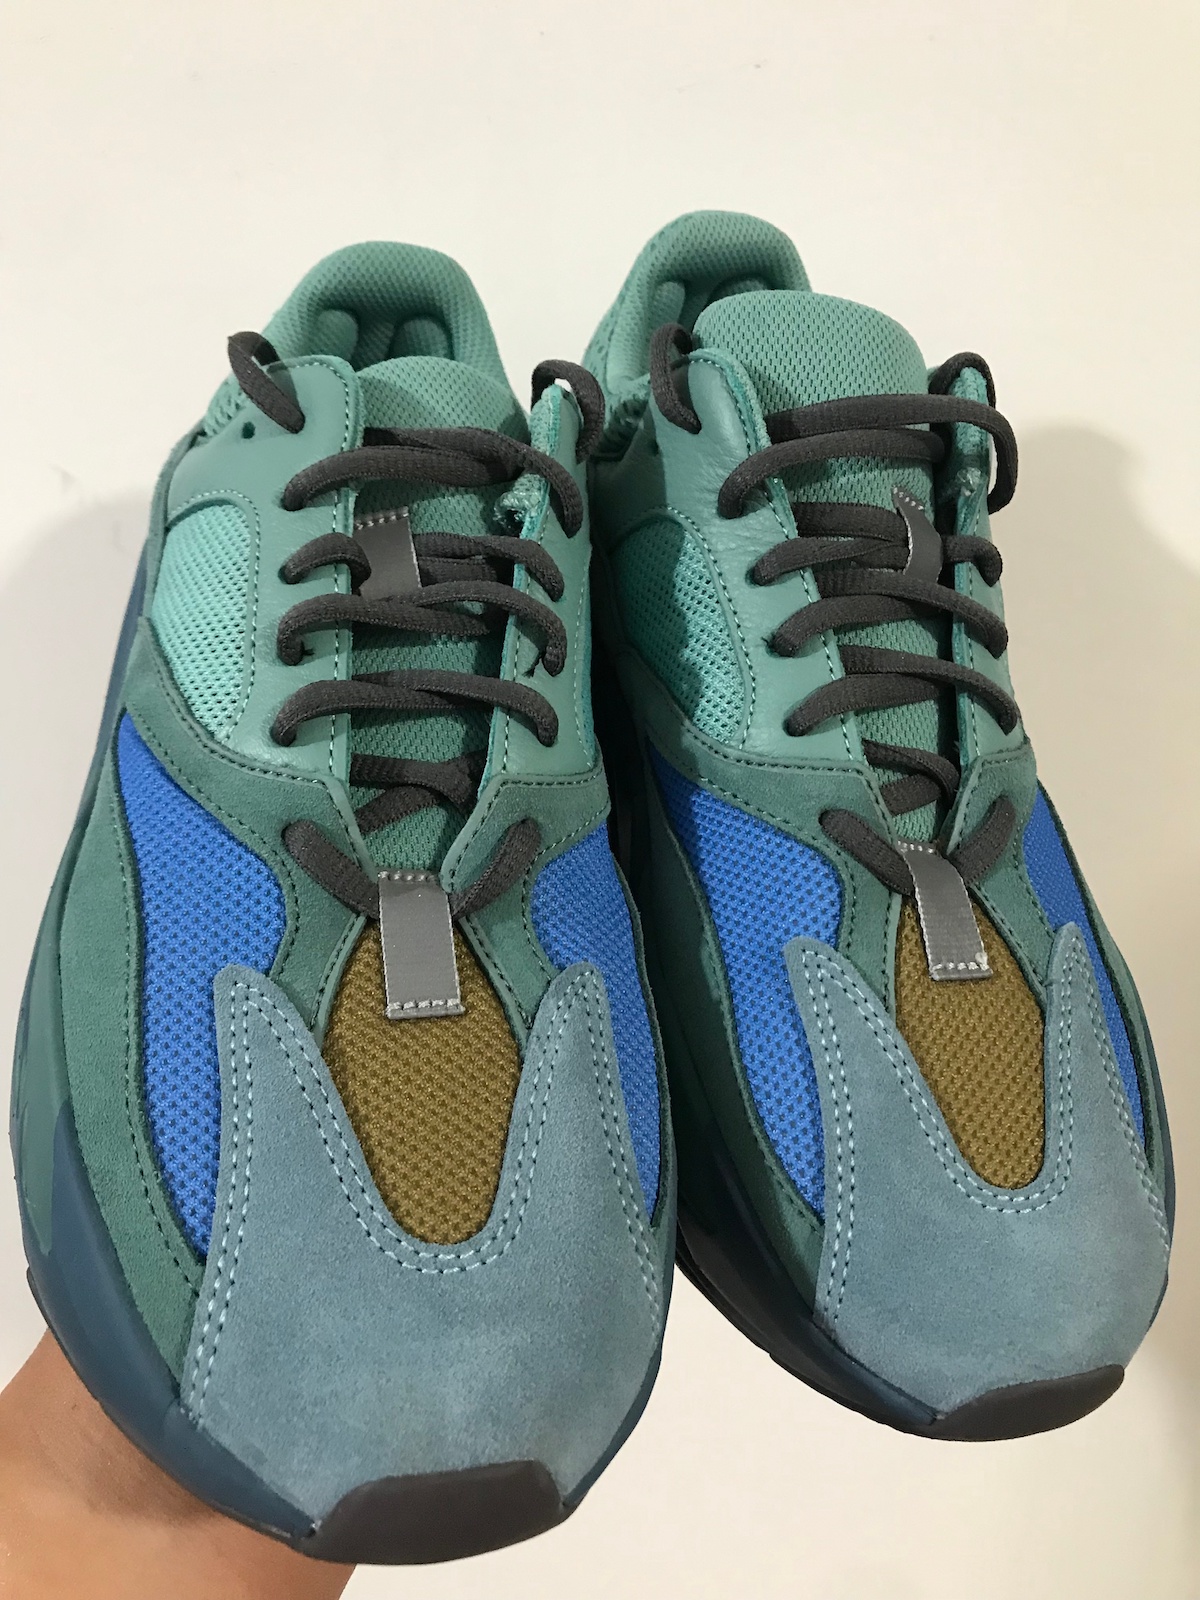 adidas Yeezy Boost 700 Faded Azure Release event 1